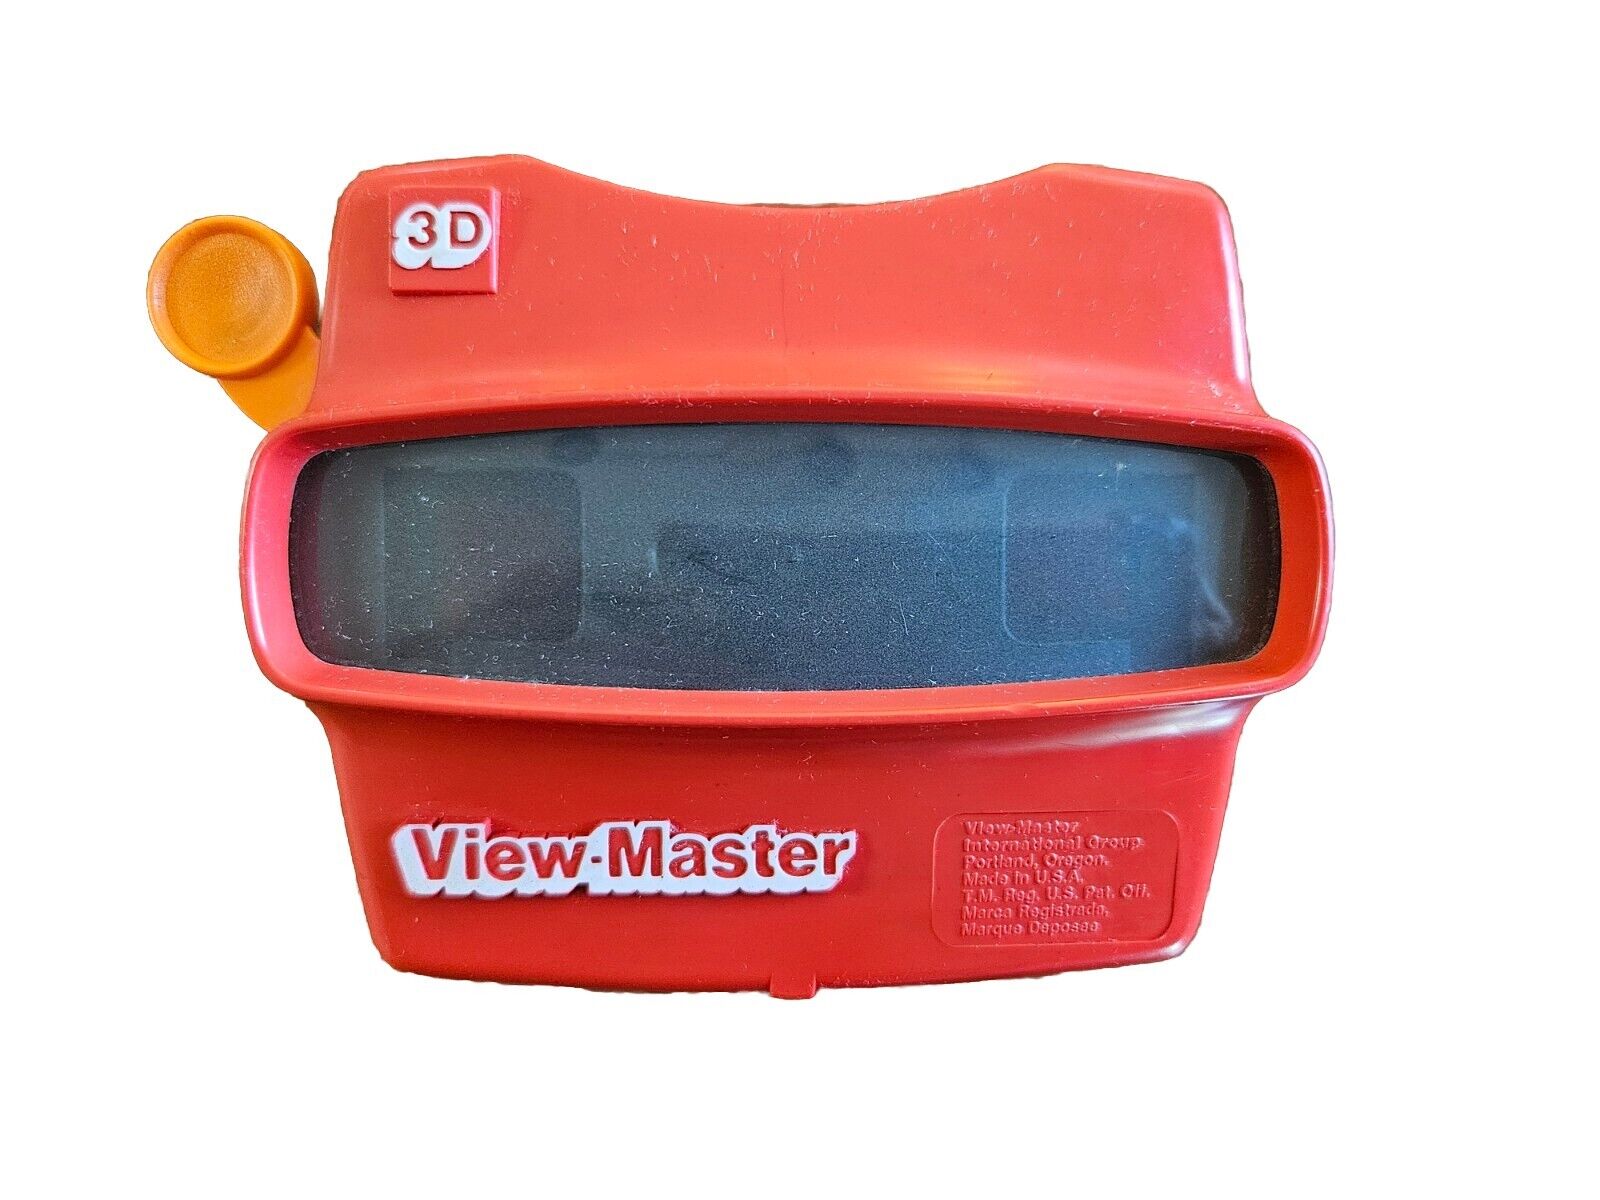 1980's Vintage Red 3D View Master Disc Projector